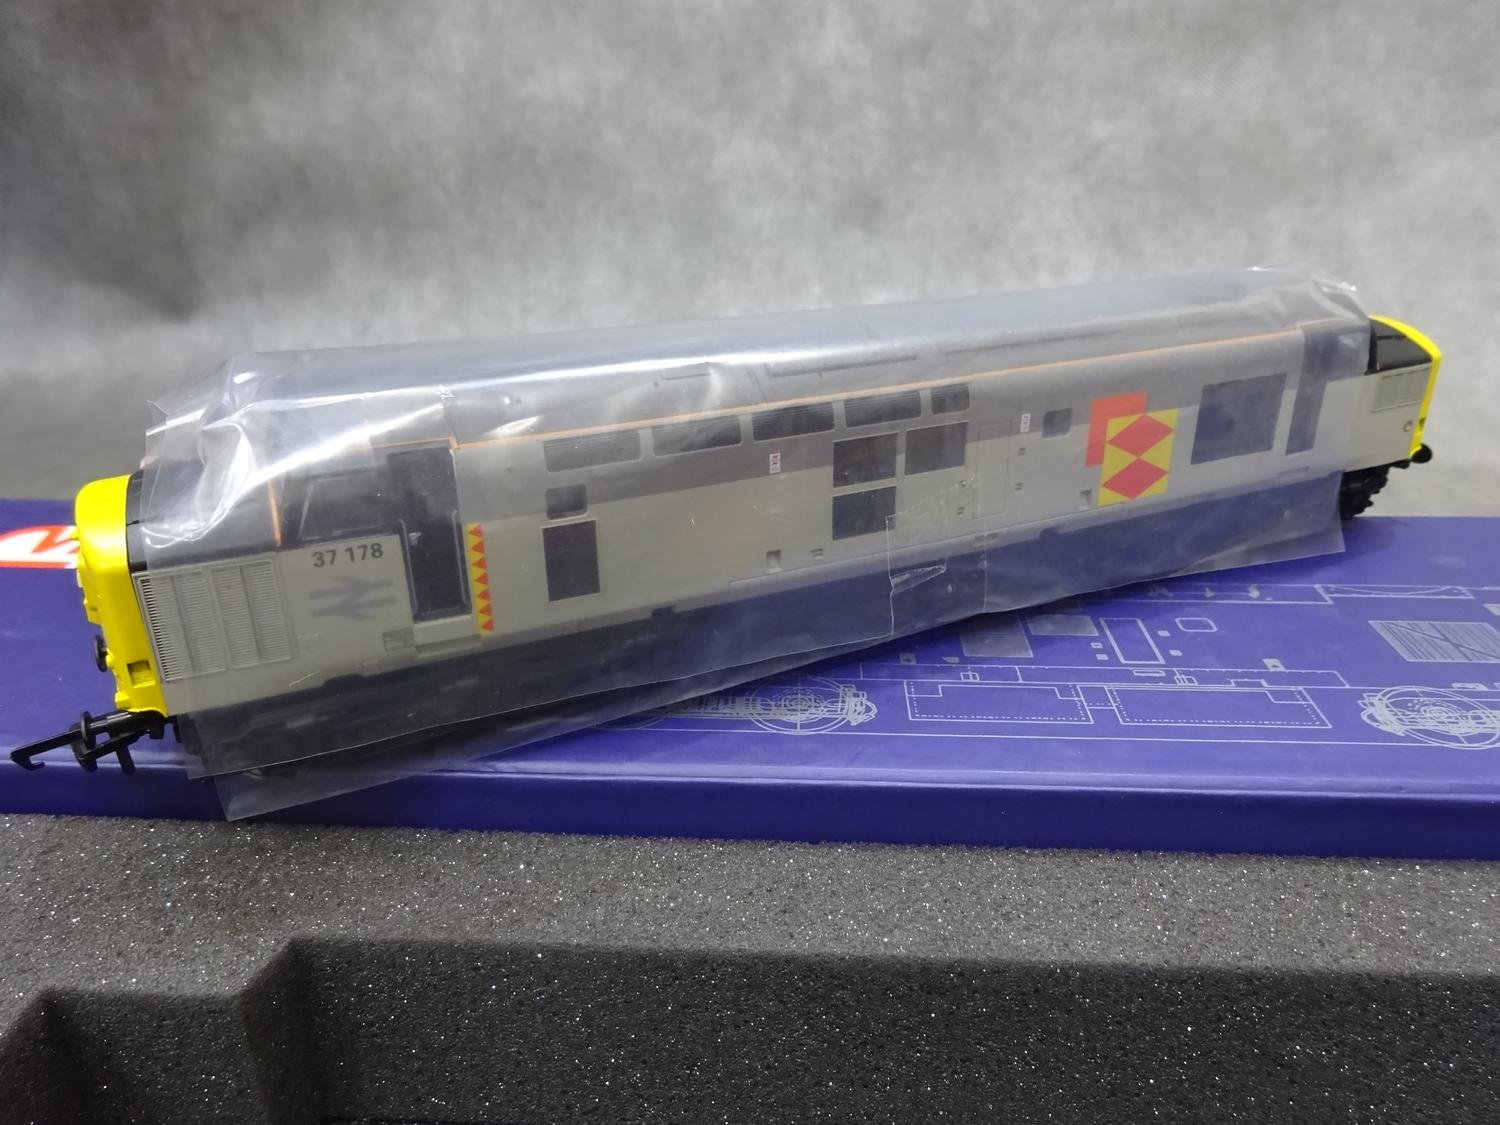 VITRAINS V2103 CLASS 37178 TWO TONE GREY 00 GAUGE - Image 2 of 3